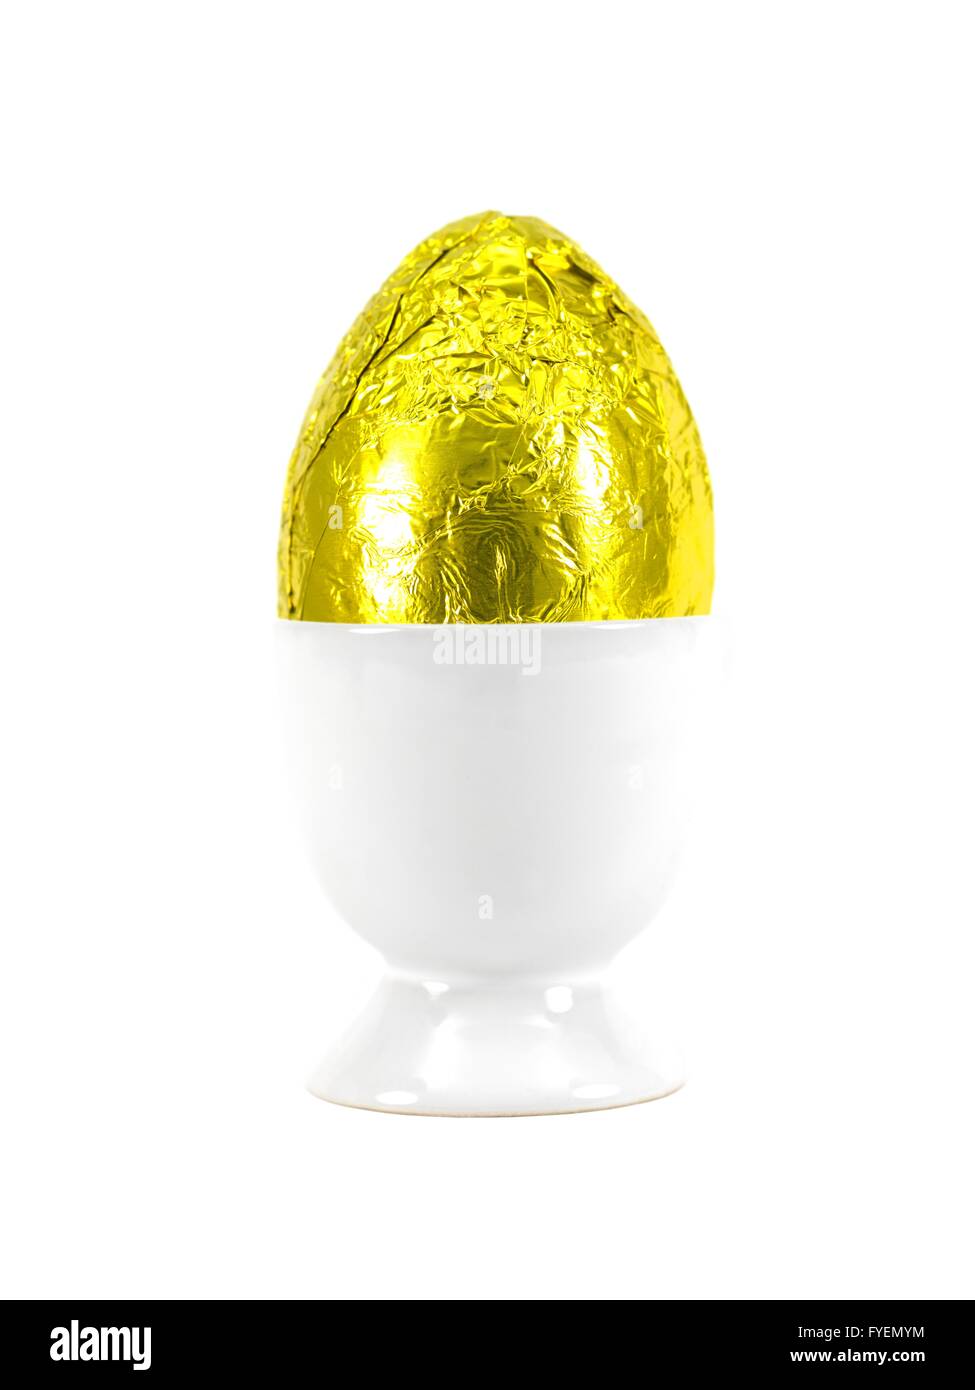 A chocolate Easter egg in a egg cup isolated against a white background Stock Photo